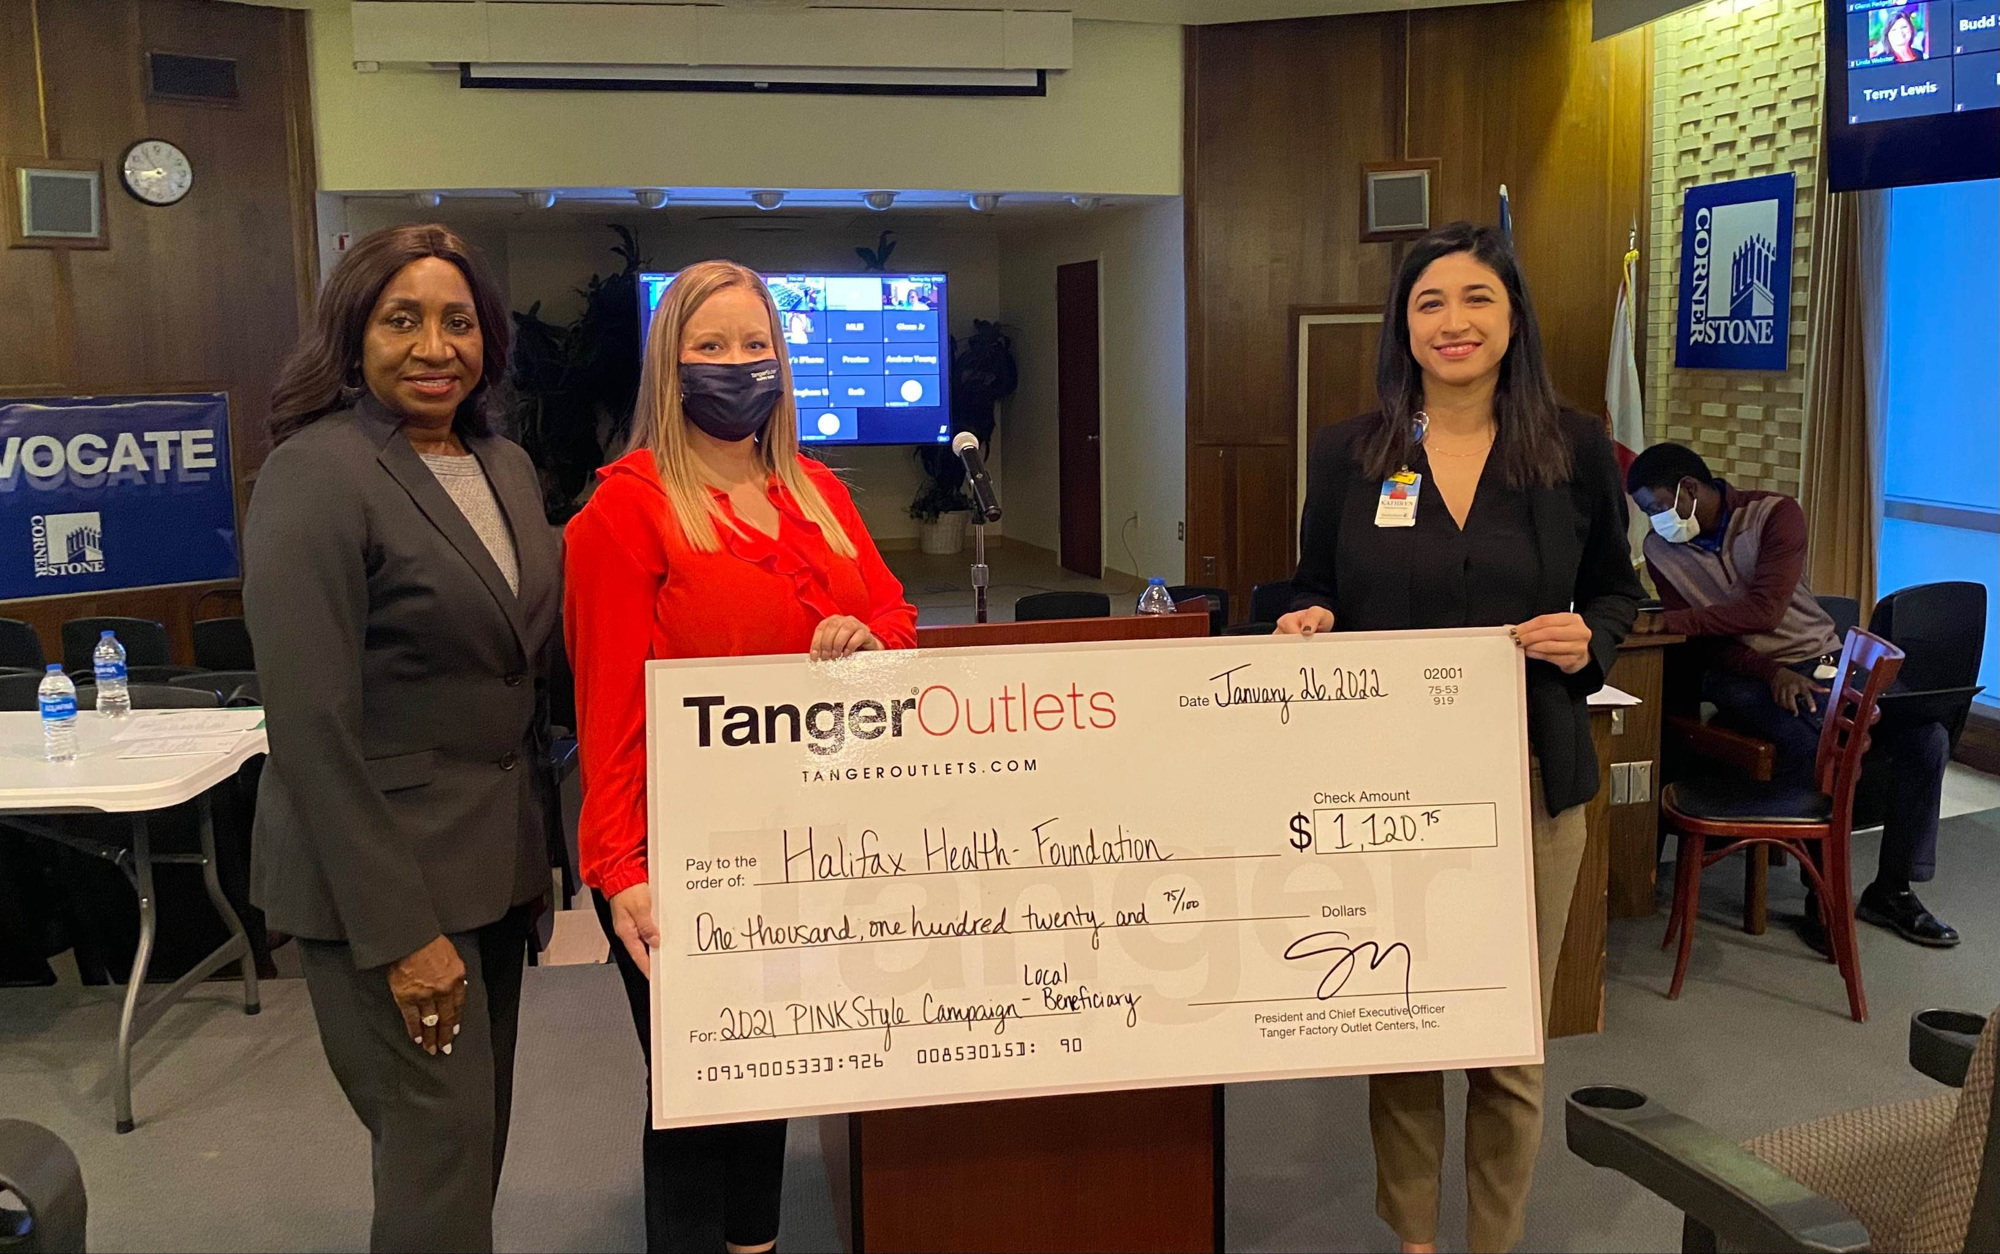 Tanger Outlets management recently announced it contributed over $1,000 to the Halifax Health Foundation in support of breast cancer awareness. Courtesy photo